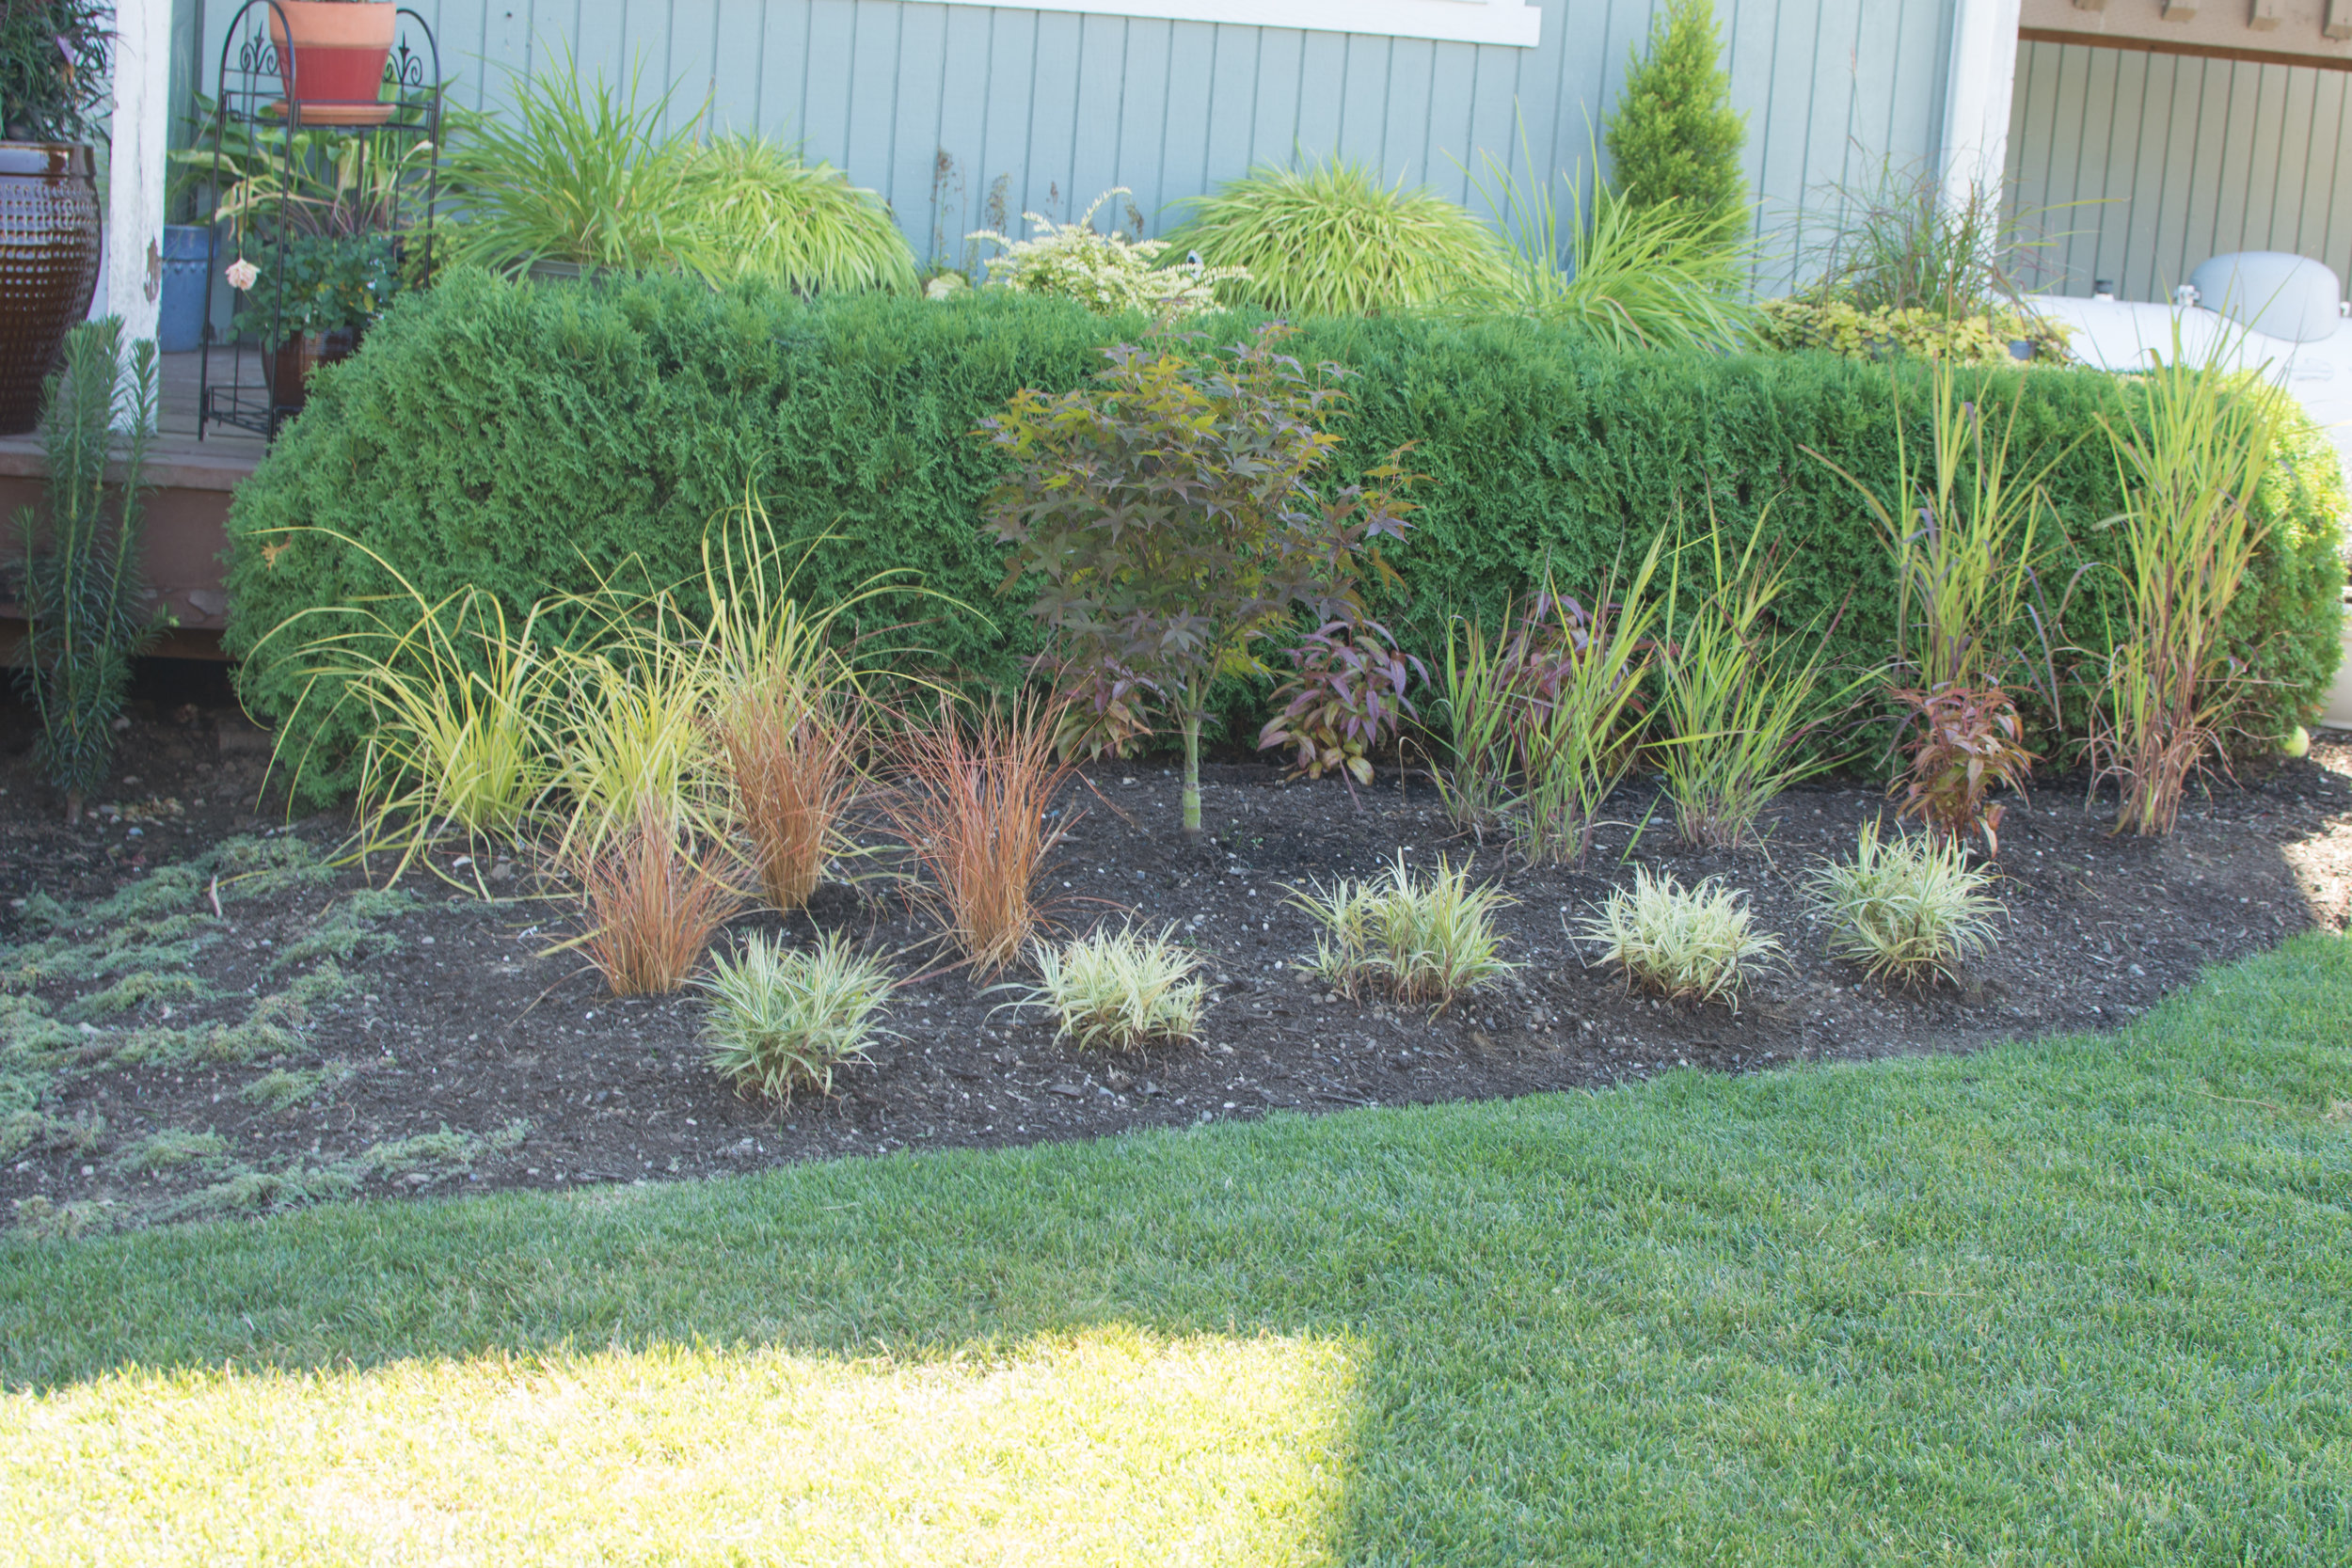 Ornamental Grasses Of Puget Sound, Landscaping With Ornamental Grasses Plans